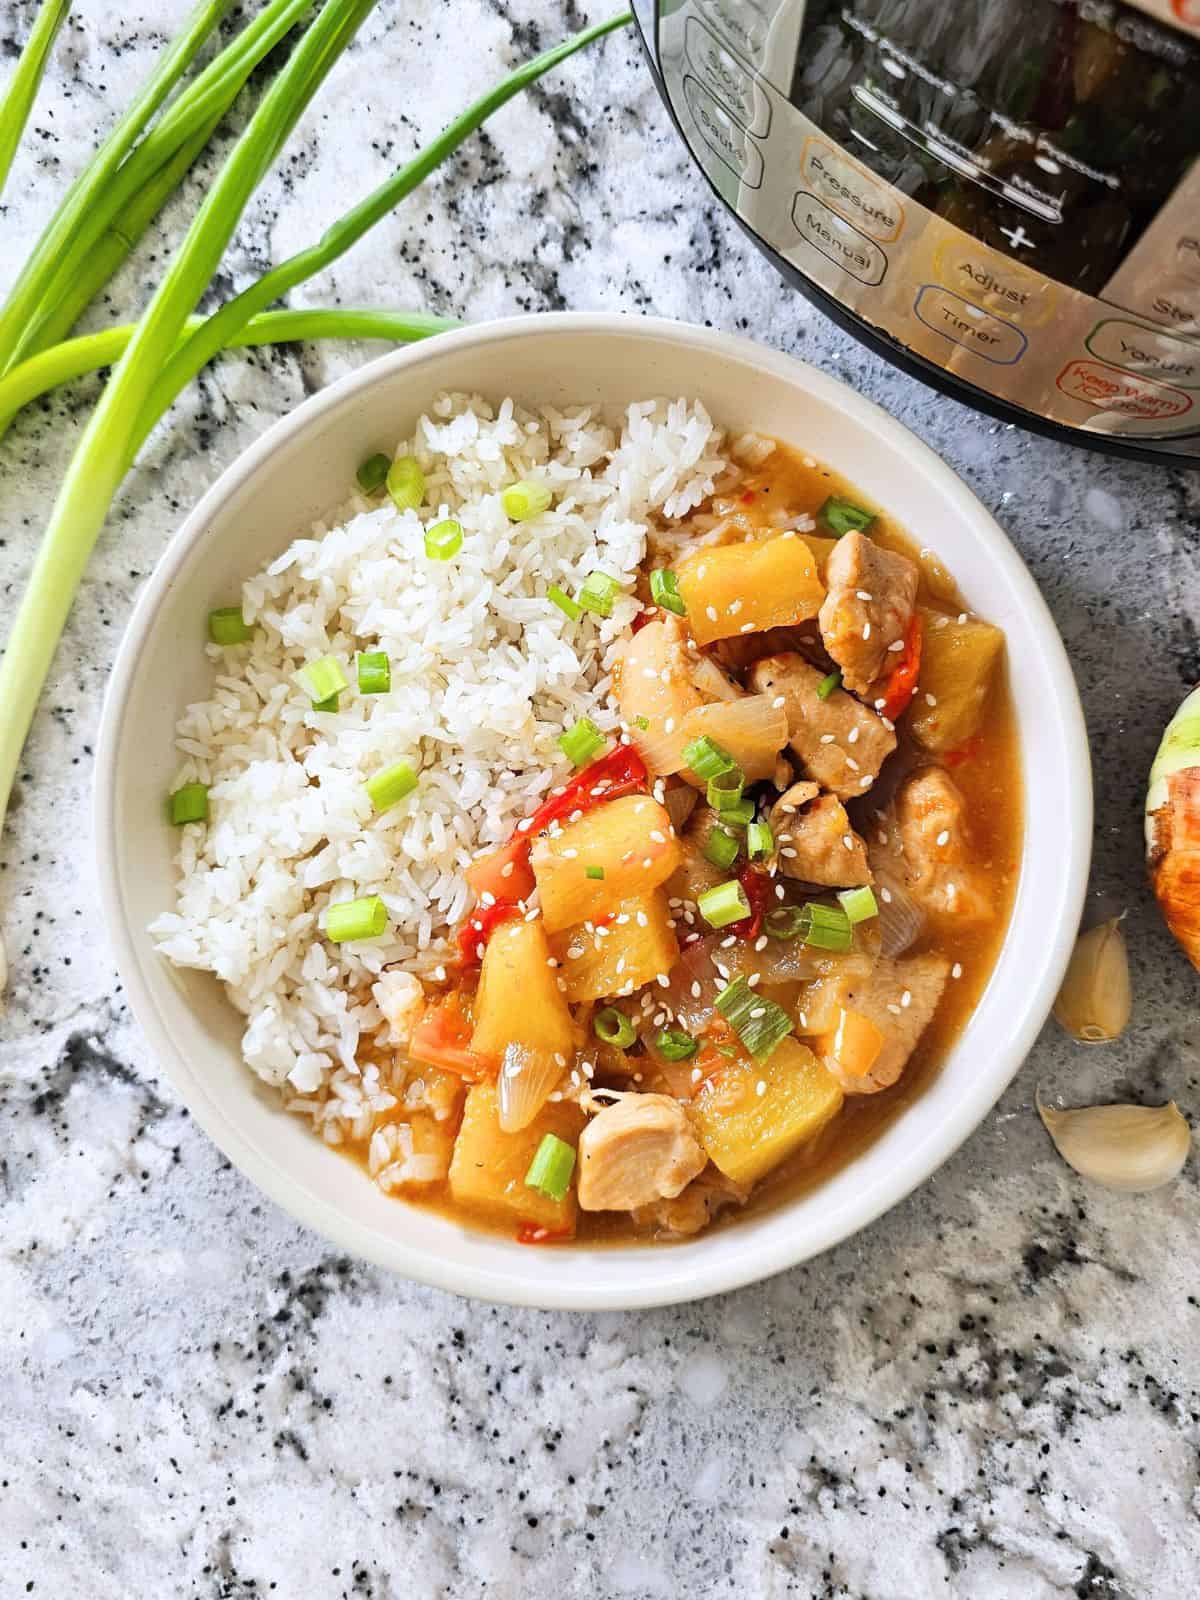 Sweet and sour chicken served next to rice with instant pot in background with green onions as well.